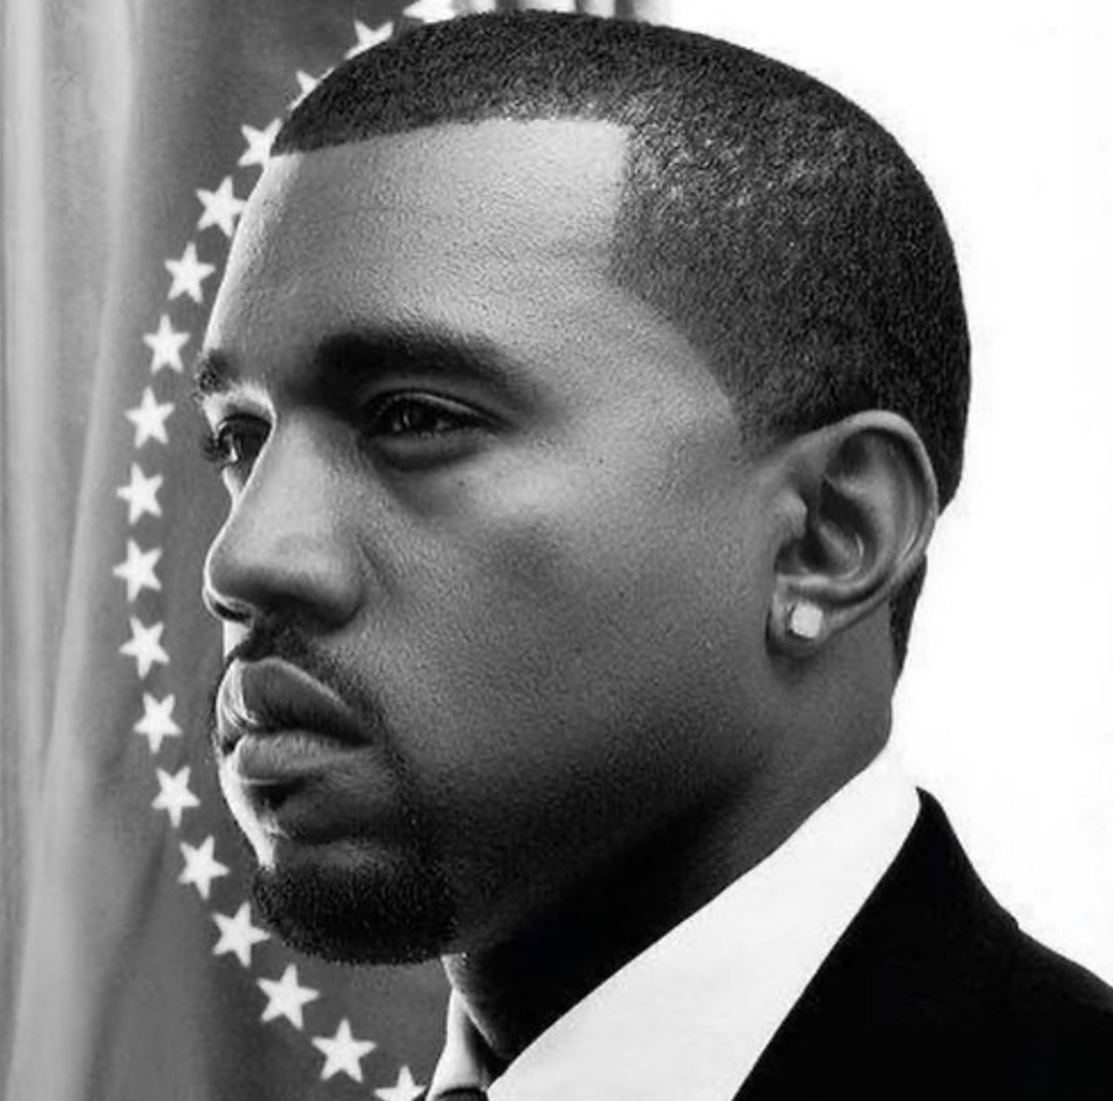 Kanye West to run for president